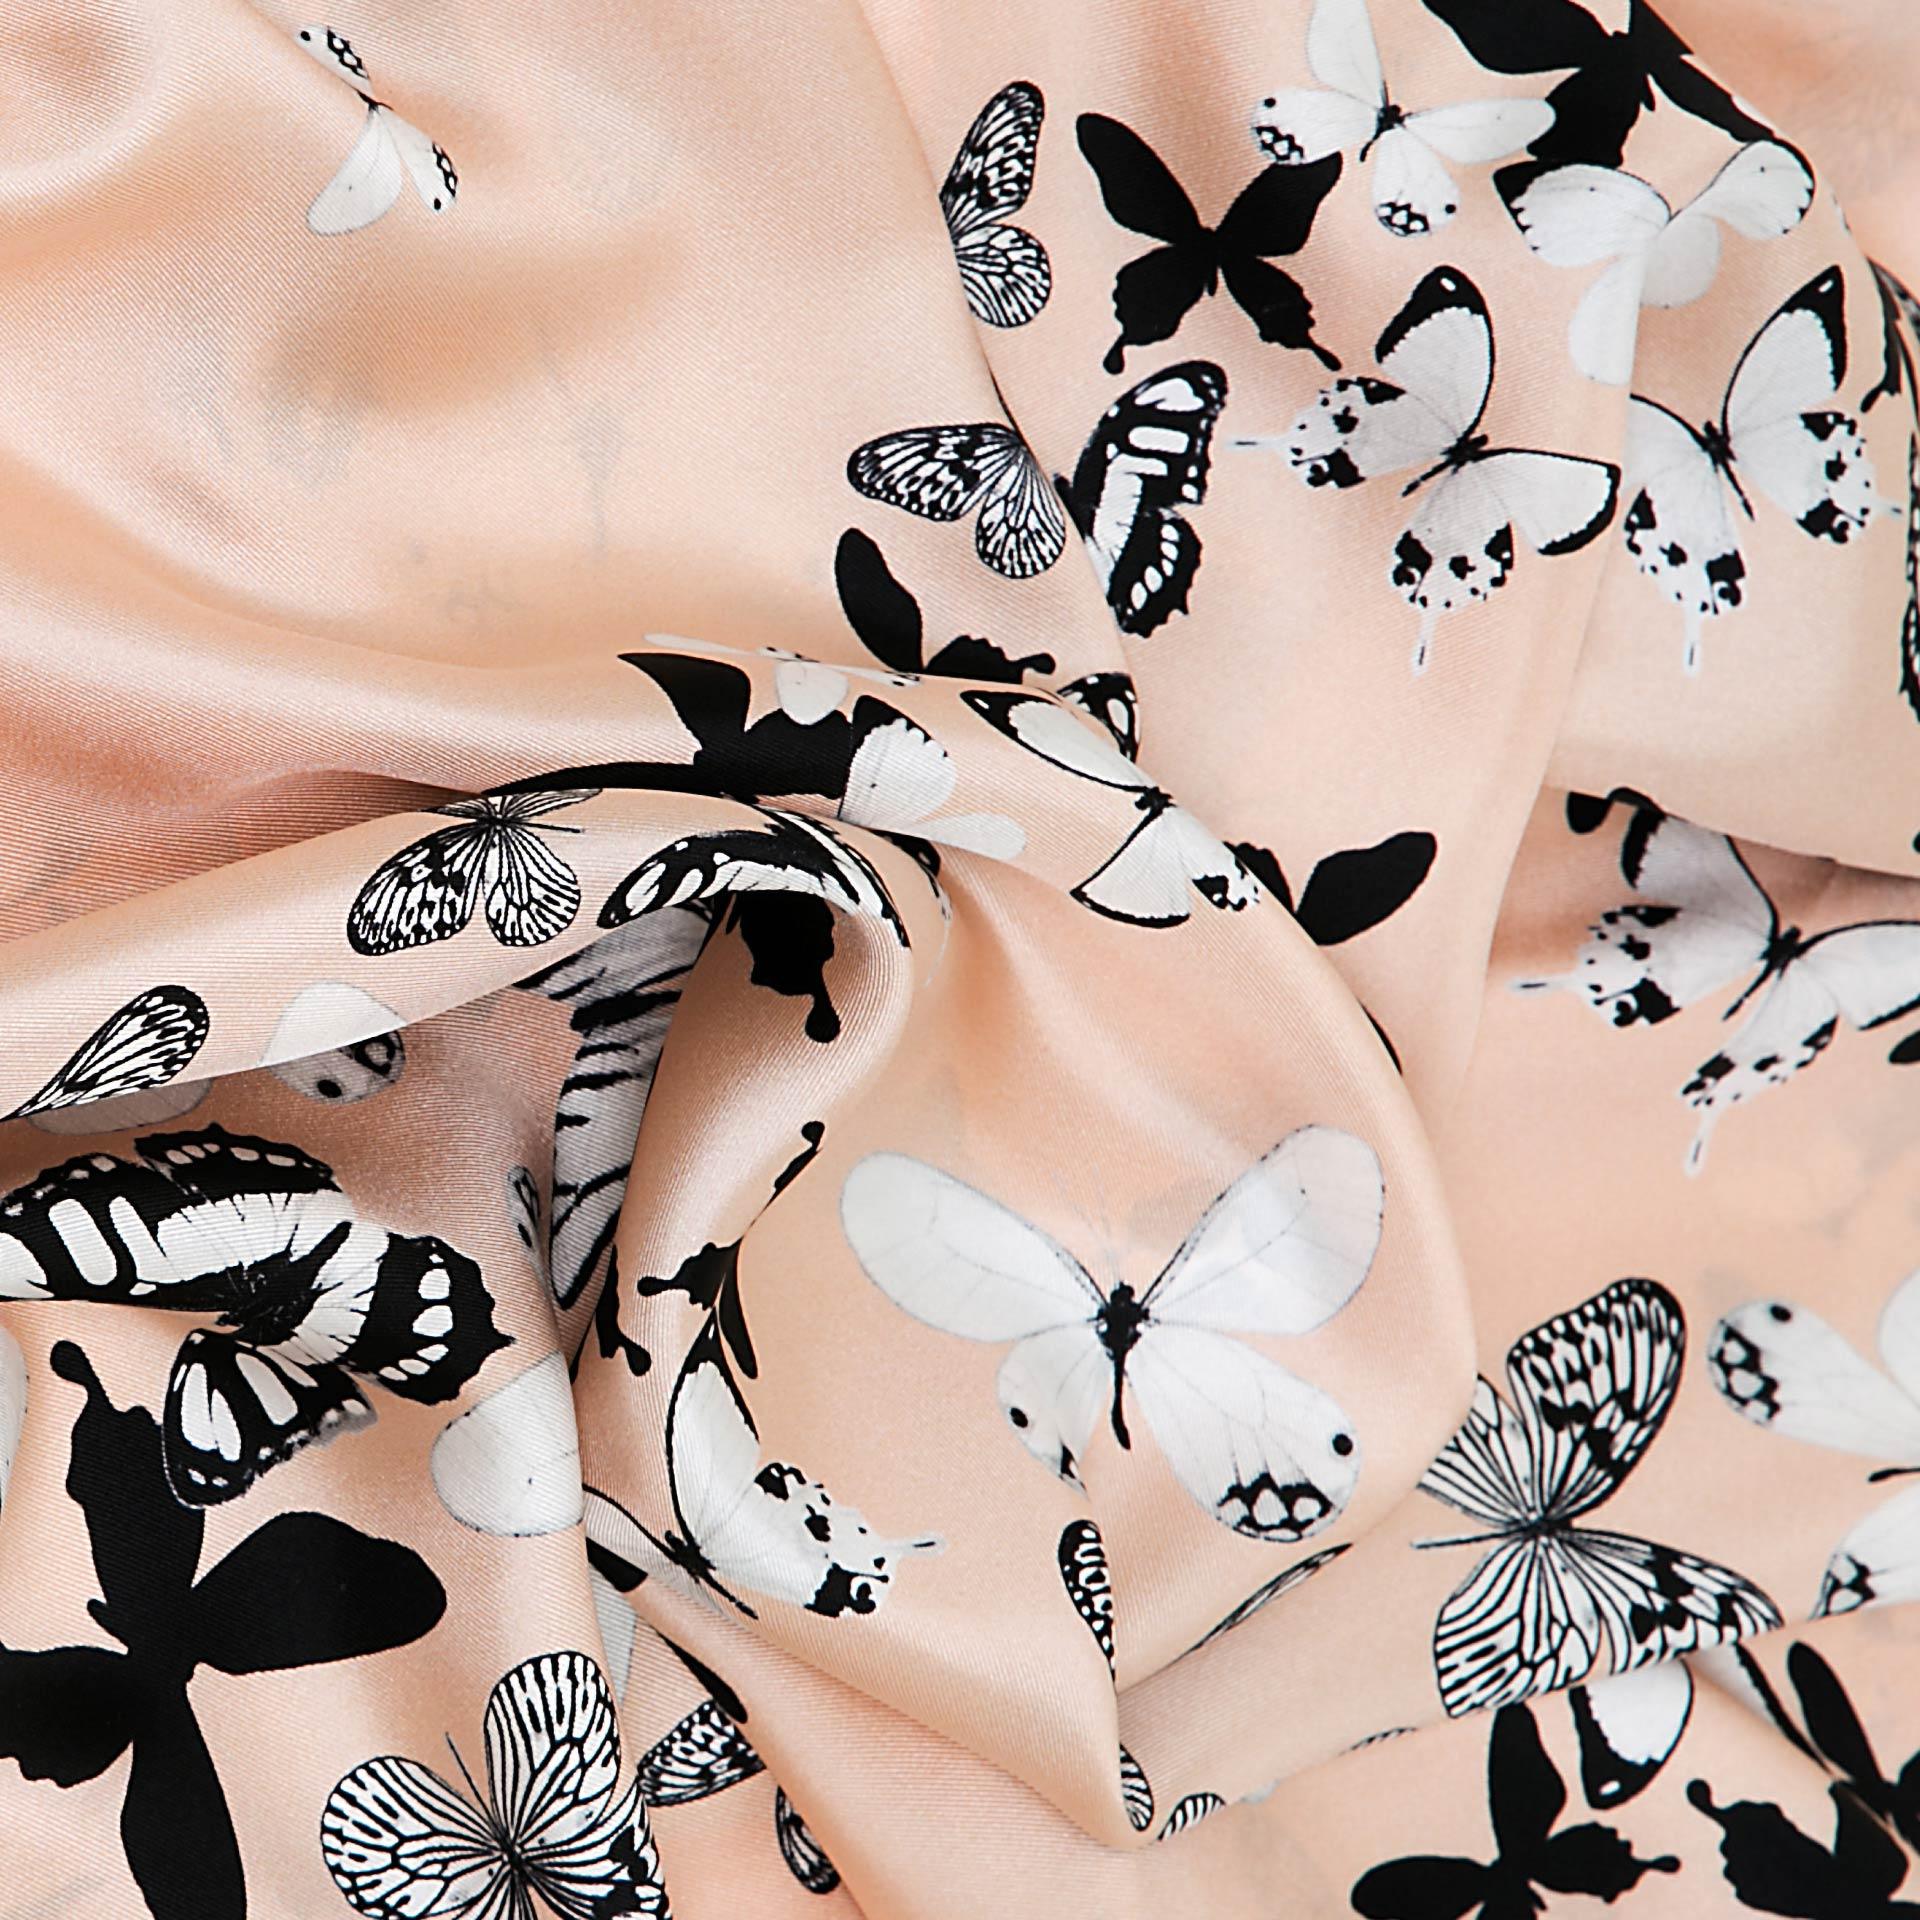 Coral Pink Butterflies Silk Scarf - A blend of London's design and Italian craftsmanship, a luxurious gift choice.